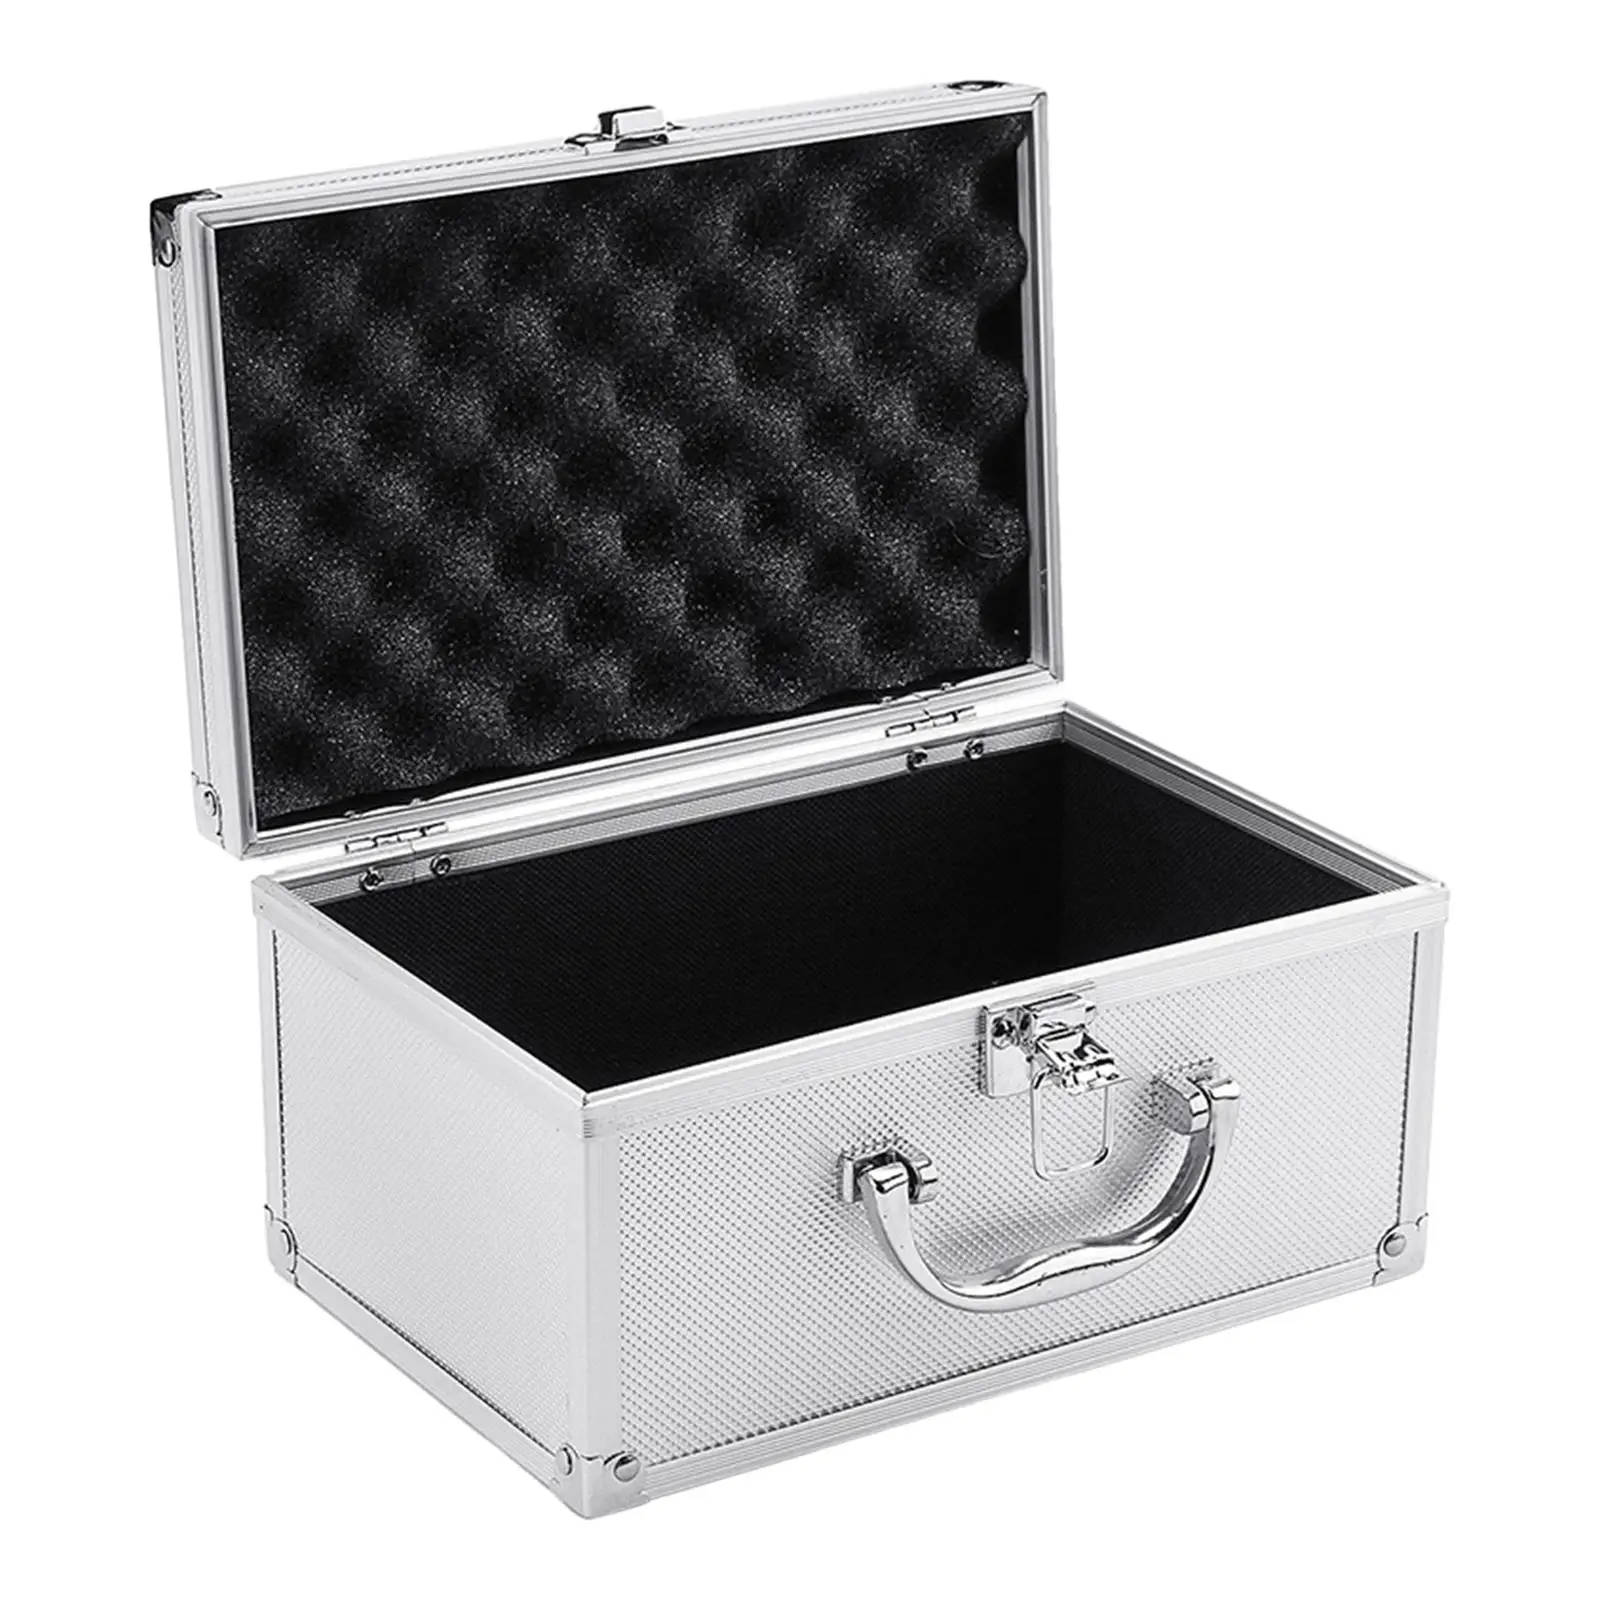 Toolbox Storage Box with Handle Equipment Box Carrying Case Screw and Nuts Hand Tools Storage for Trunk Home Garage Warehouse